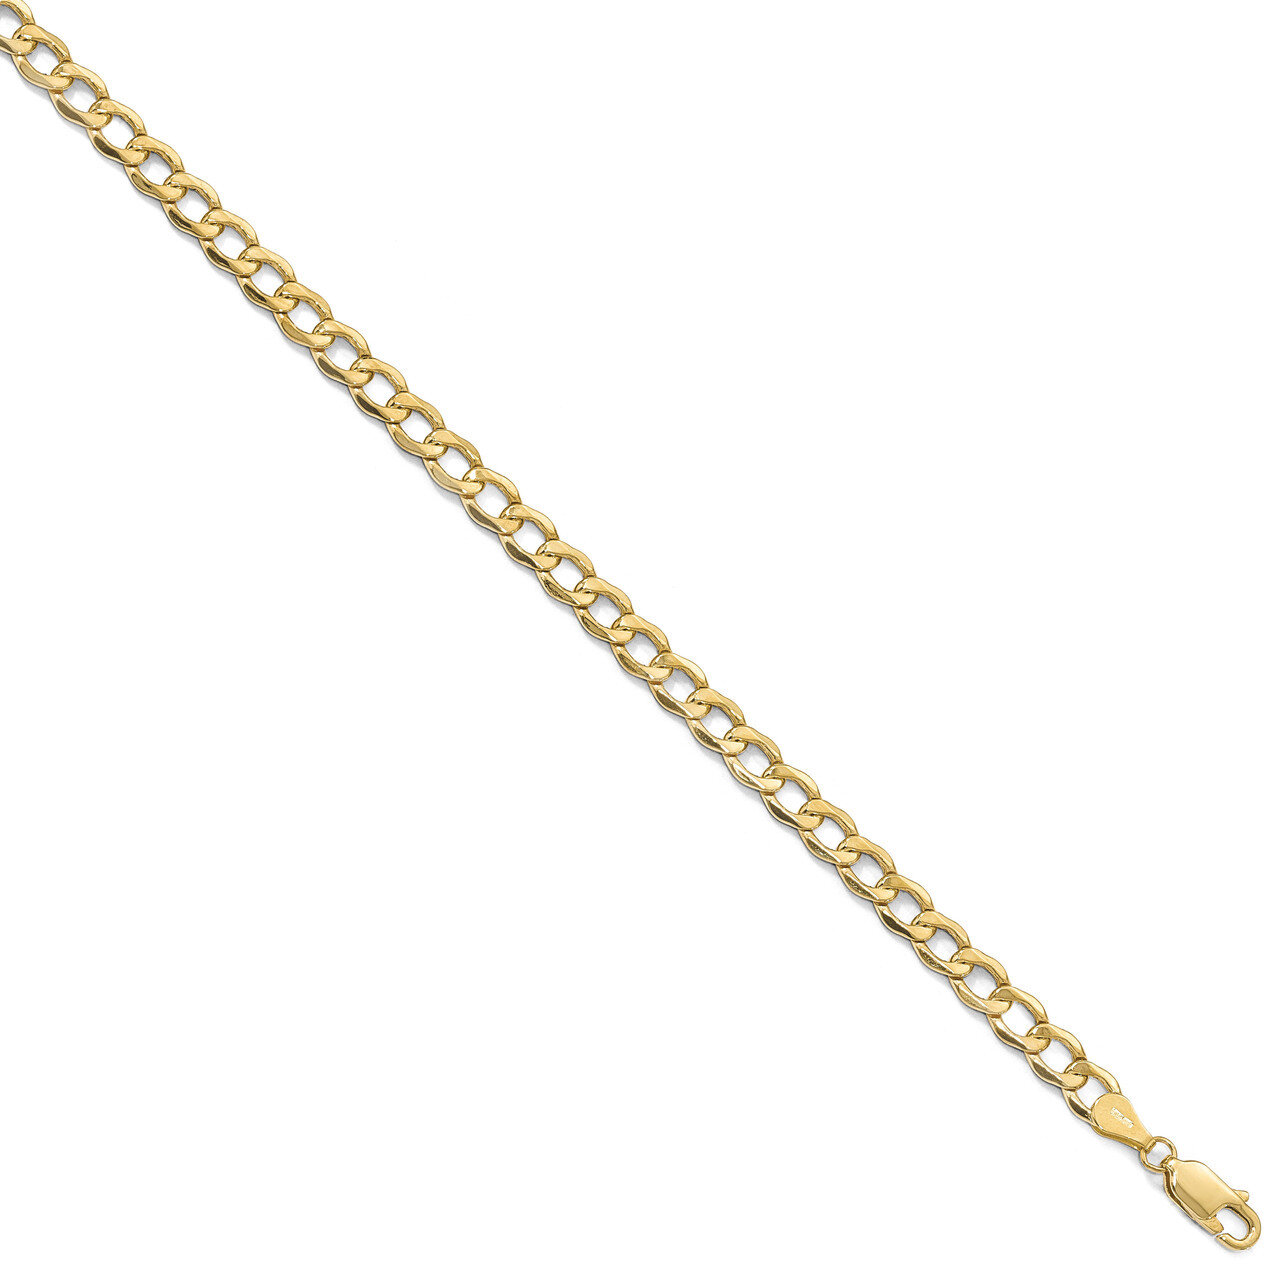 5.25mm Semi-Solid Curb Link Chain 24 Inch 10k Gold HB-8241-24